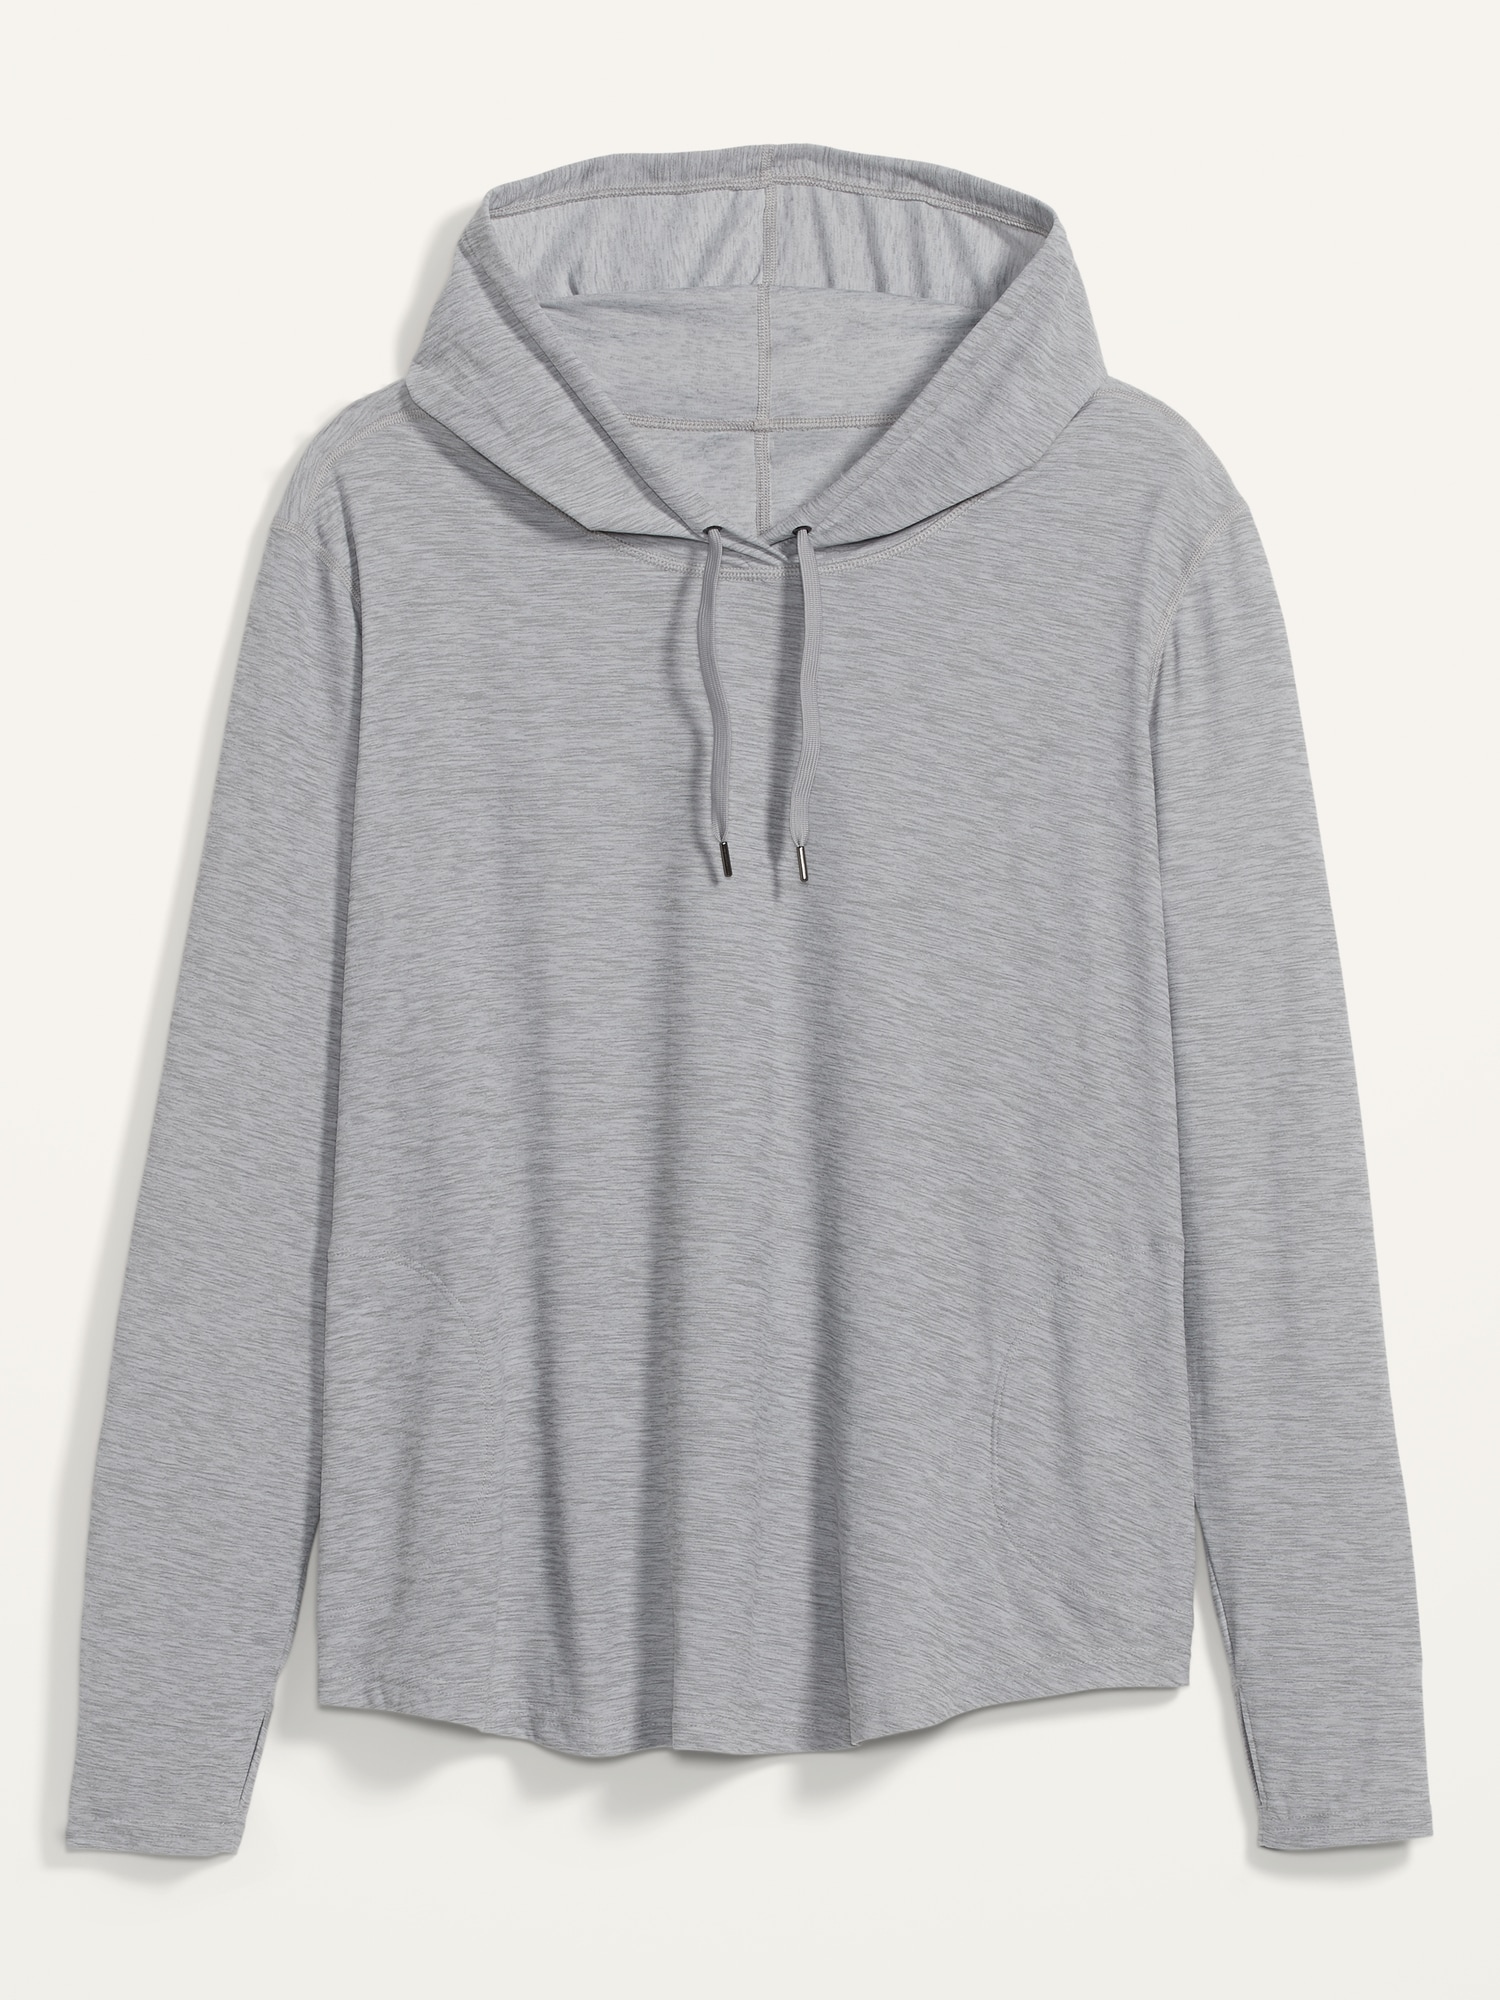 Breathe ON Plus-Size Pullover Hoodie | Old Navy